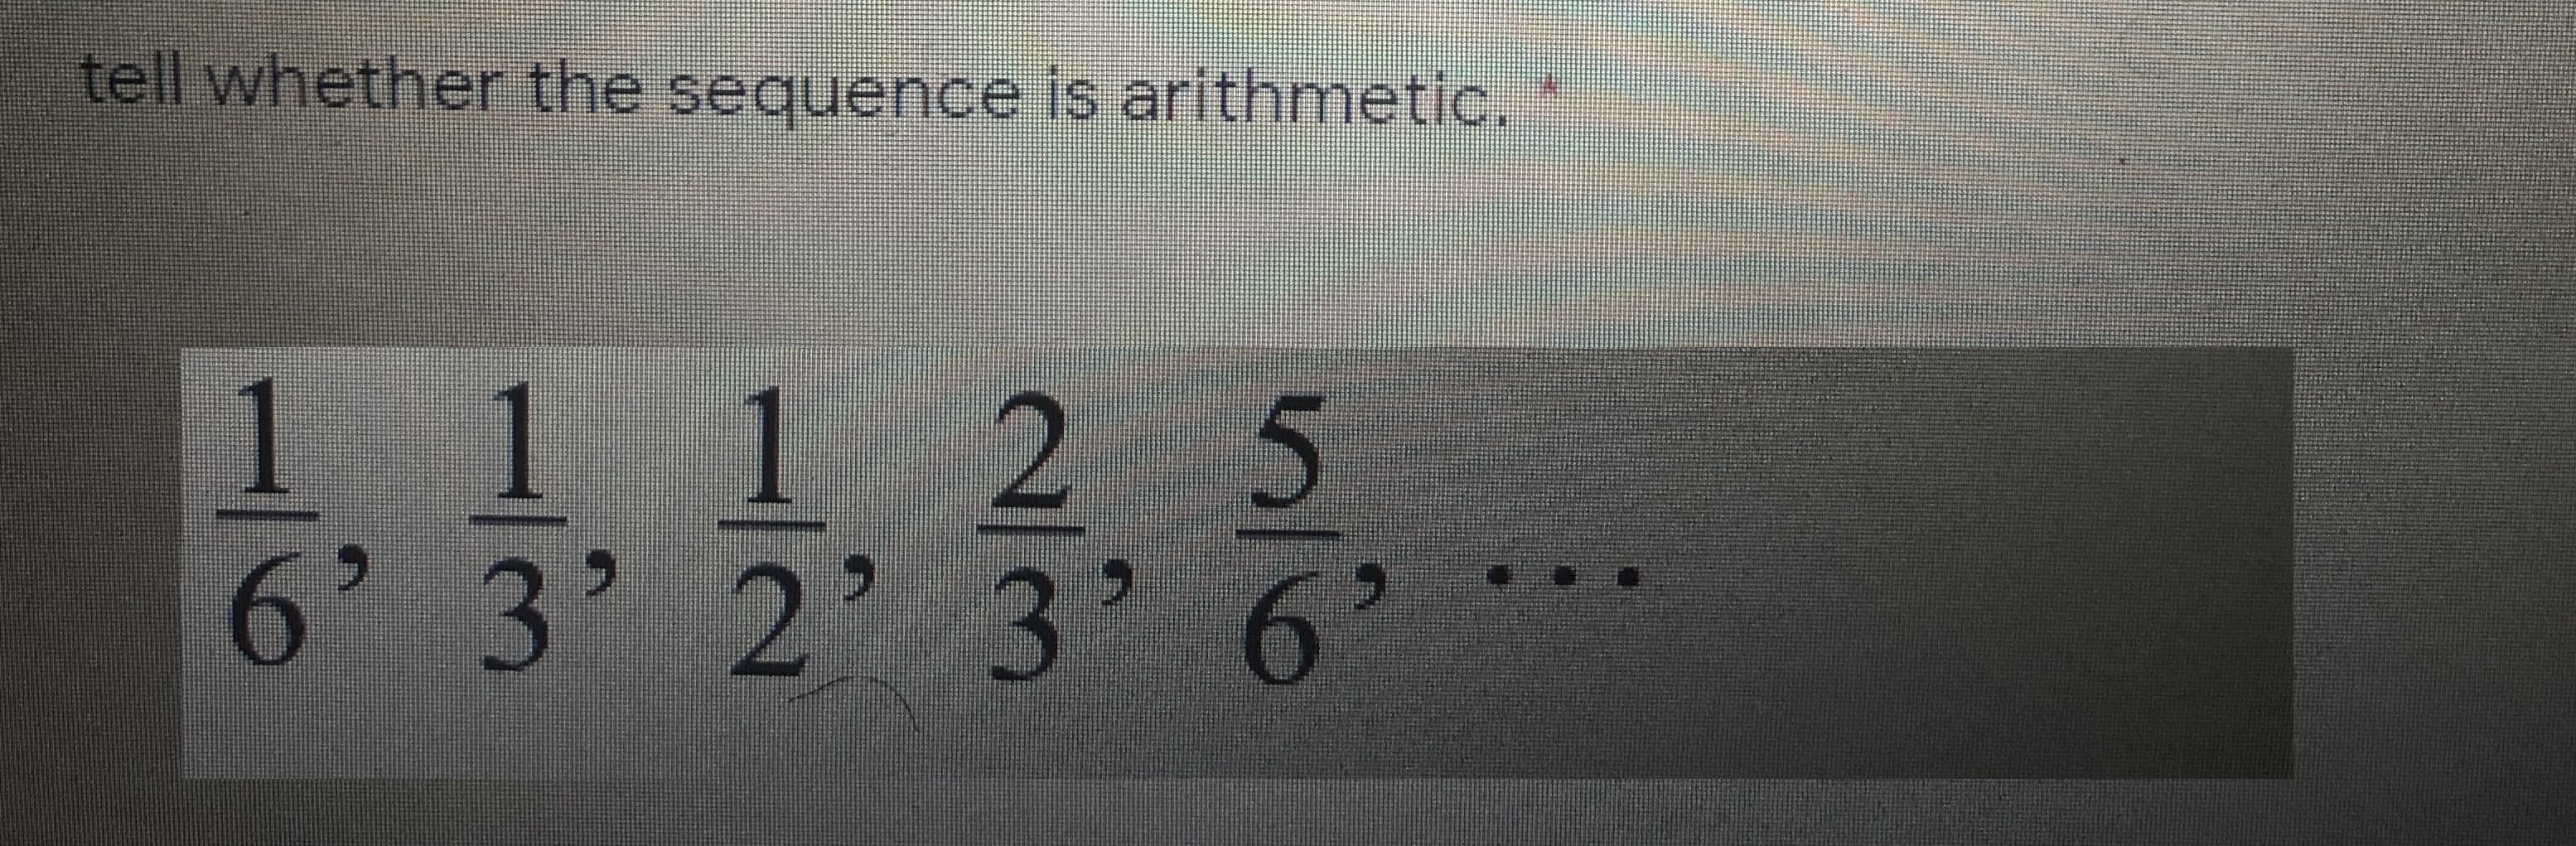 tell whether the sequence is arithmetic.
11
2 5
6' 3' 2' 3
1.
' 6
